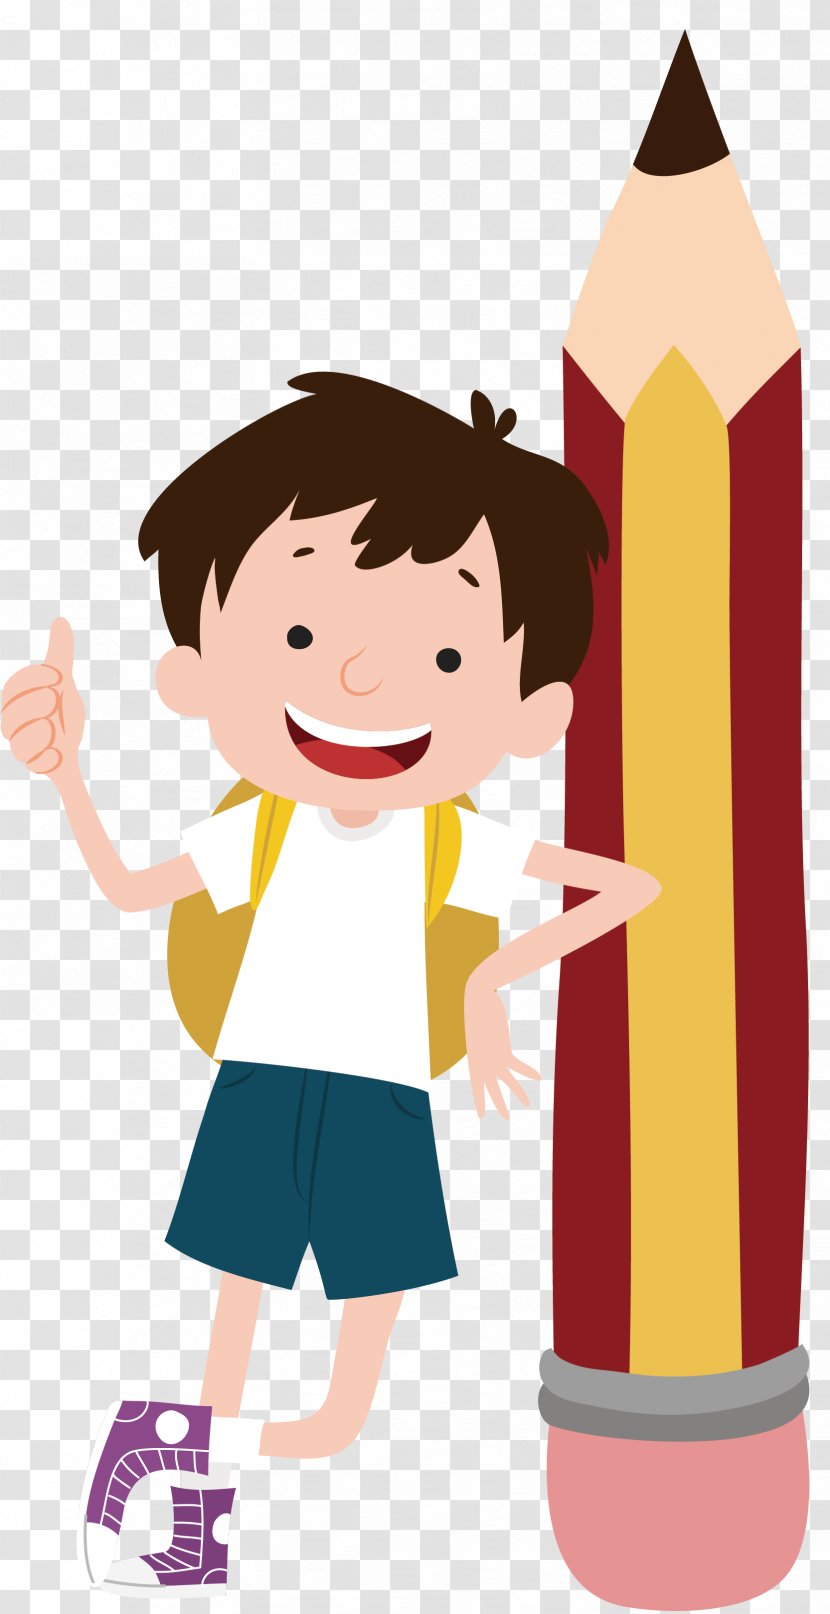 Student Class School - Tree - The Boy With A Pencil Transparent PNG